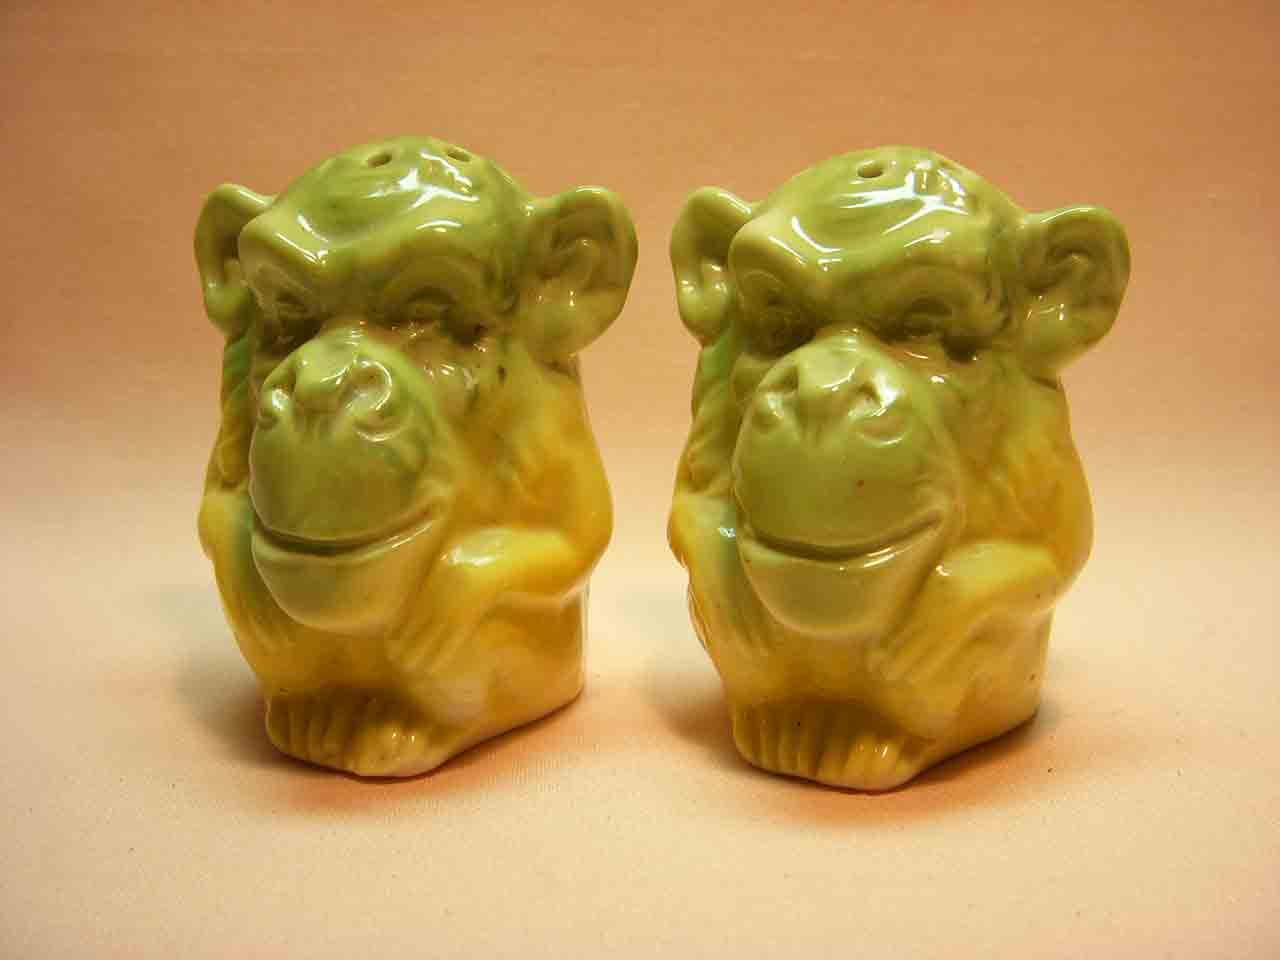 Conta & Boehme Germany monkeys salt and pepper shakers